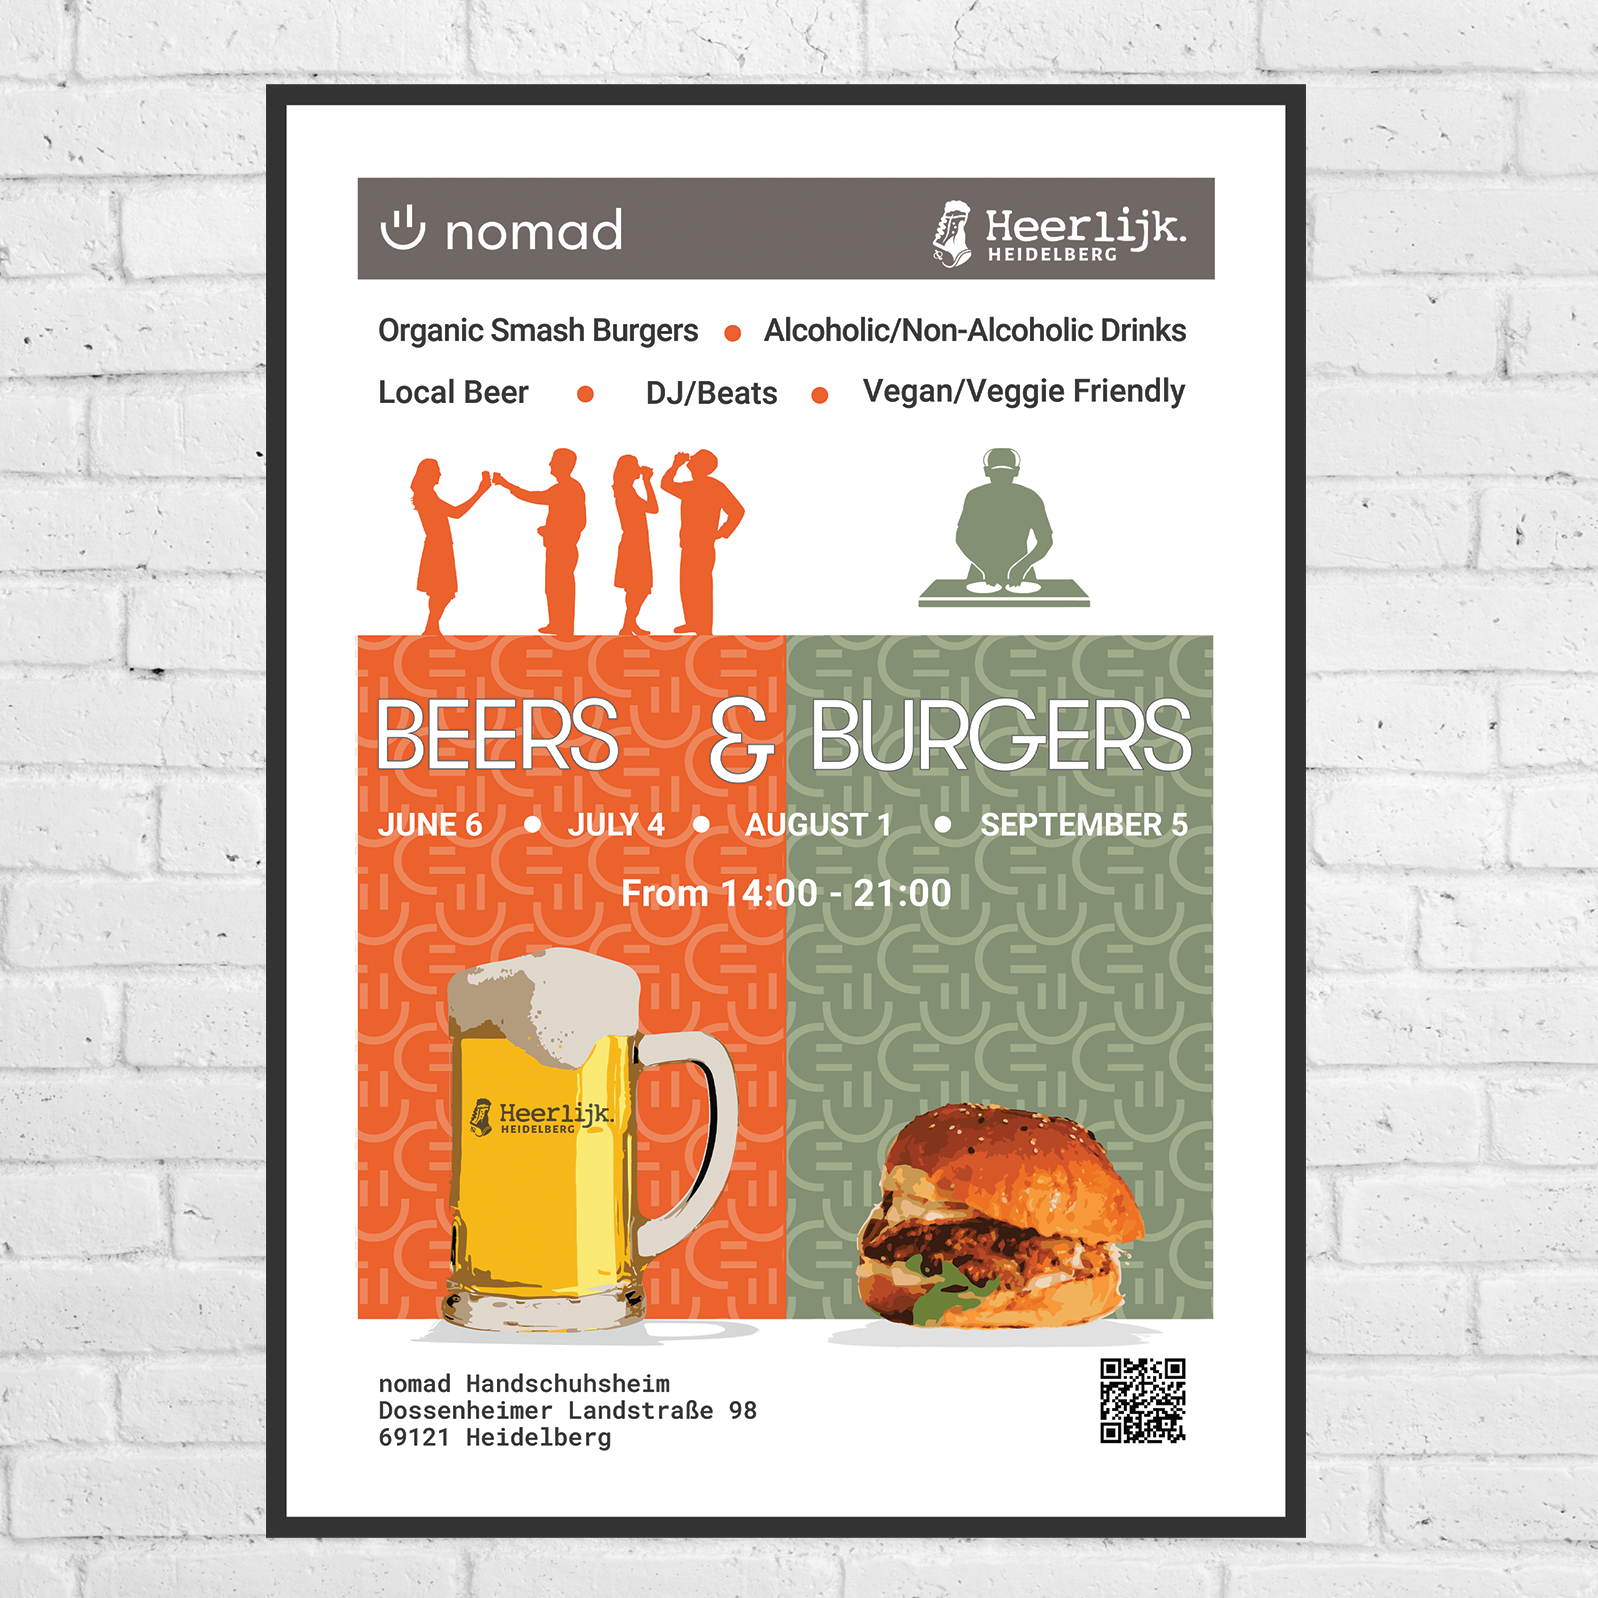 Poster idea for rooftop event featuring beers, burgers and DJ